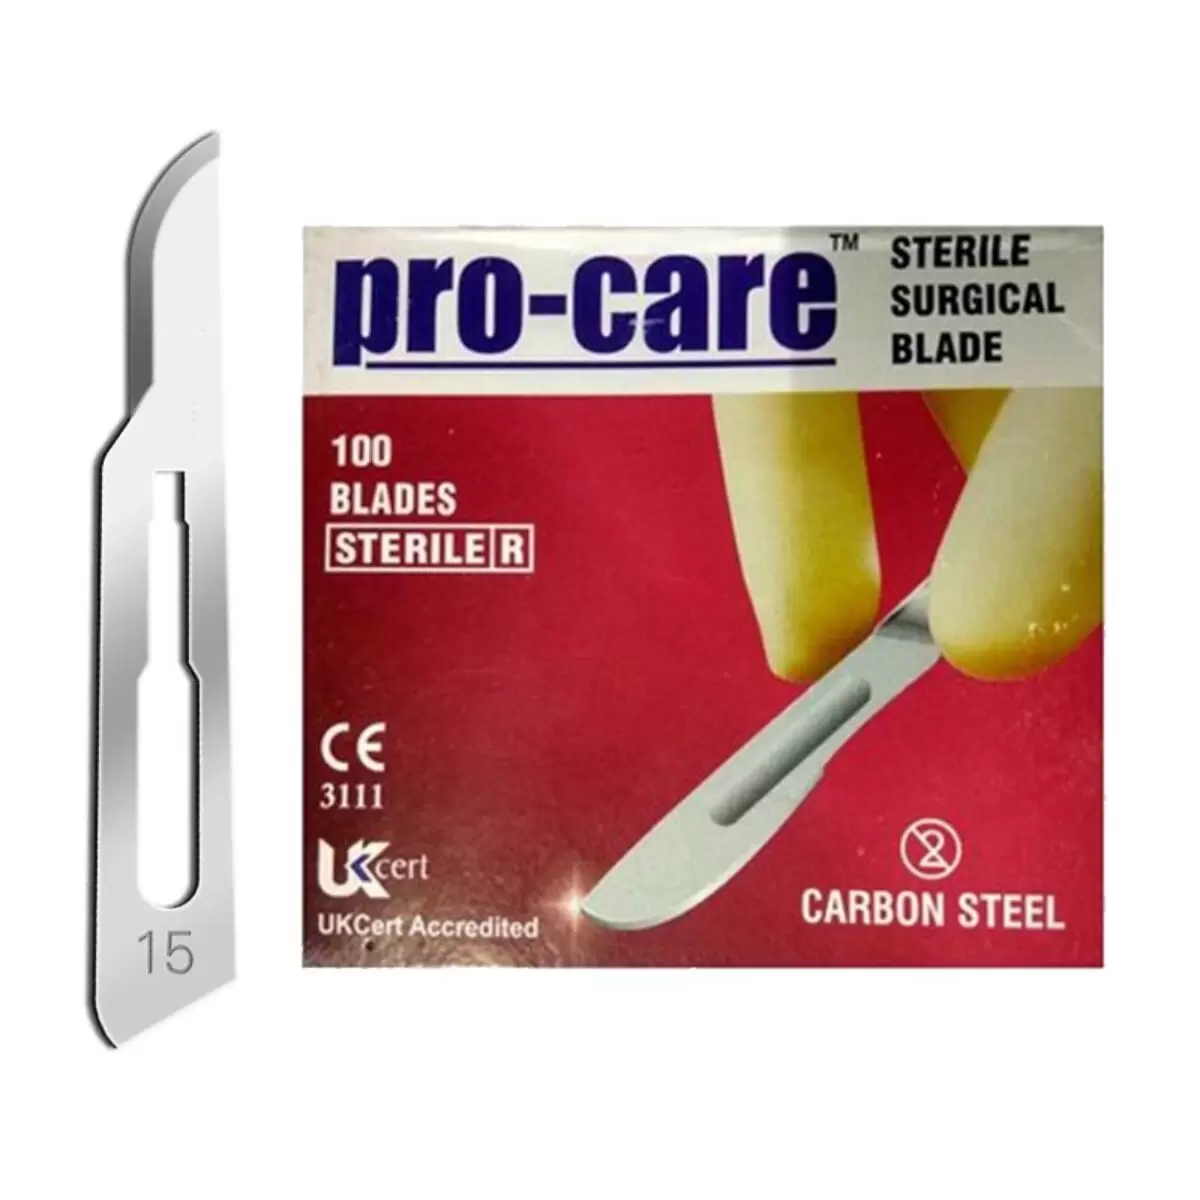 ProCare Surgical Blades